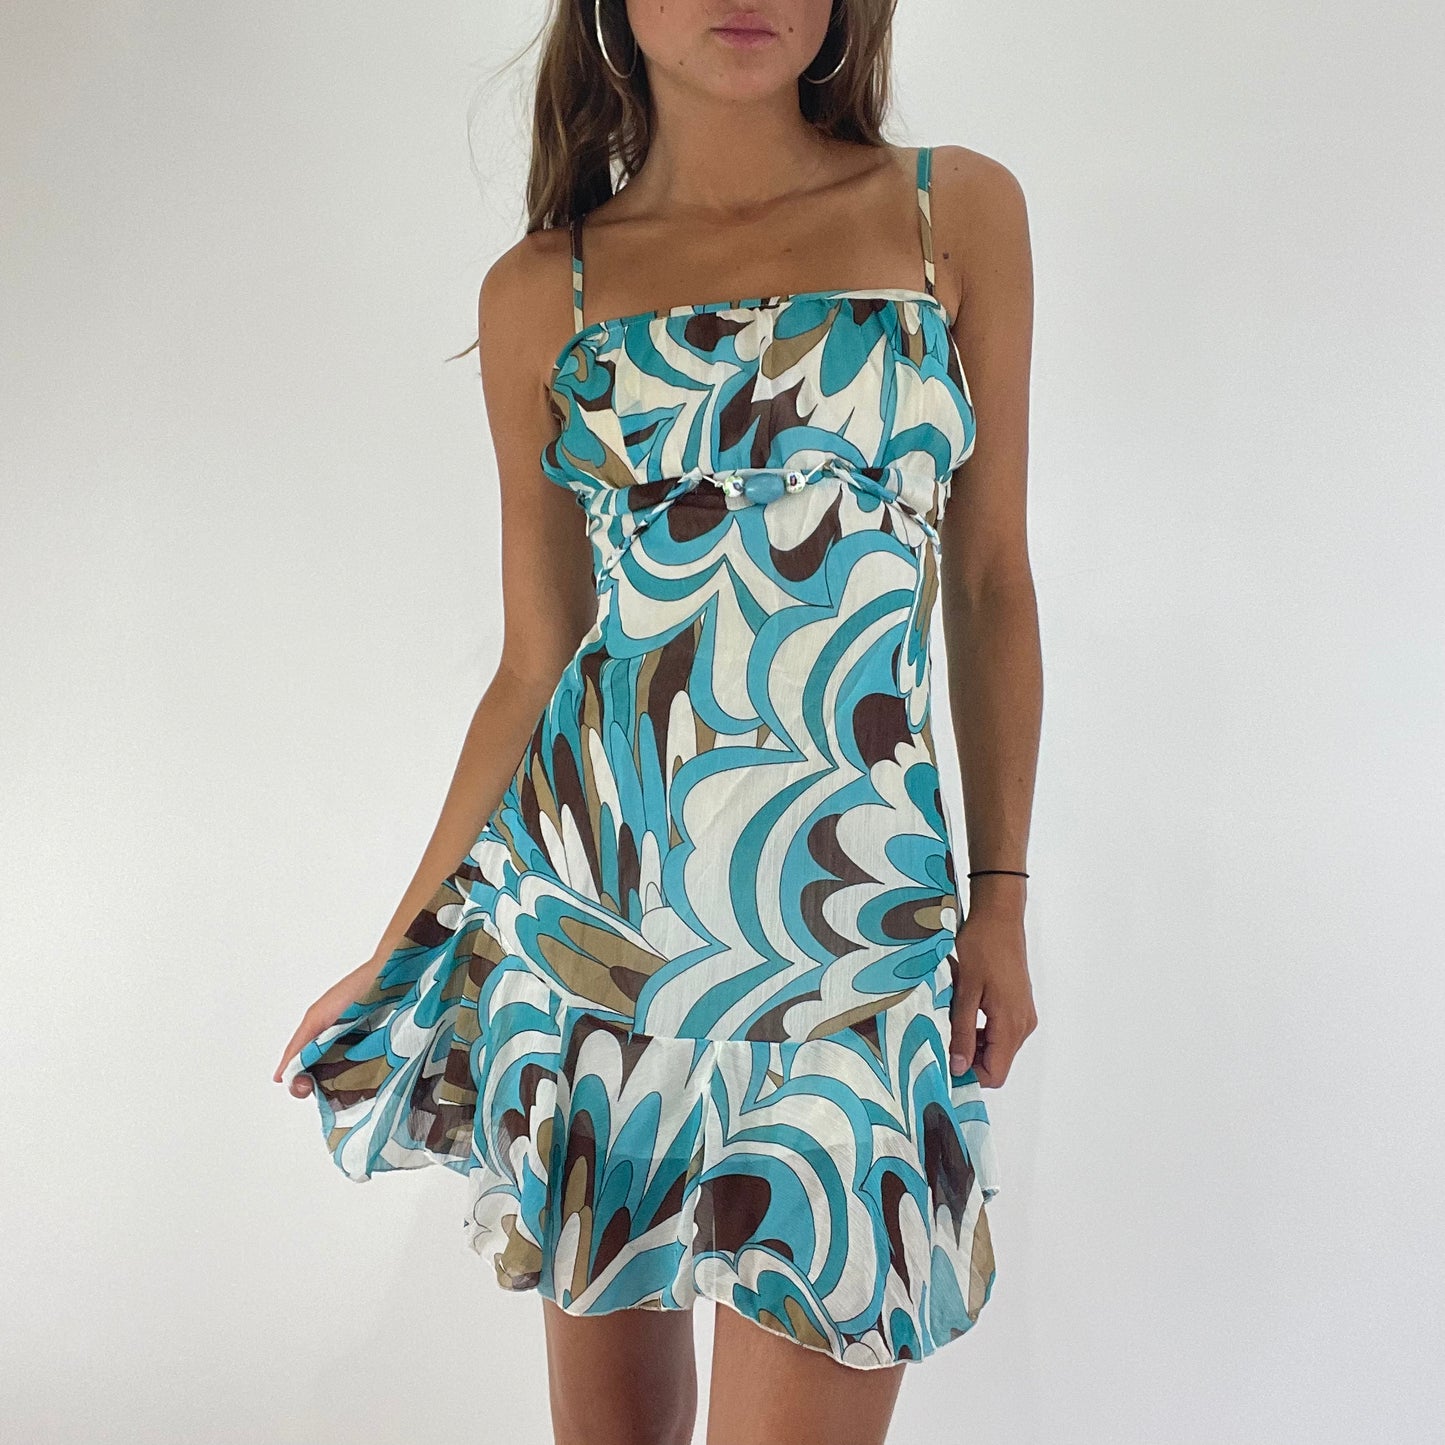 TROPICAL GIRL DROP | blue and brown patterned dress - xs